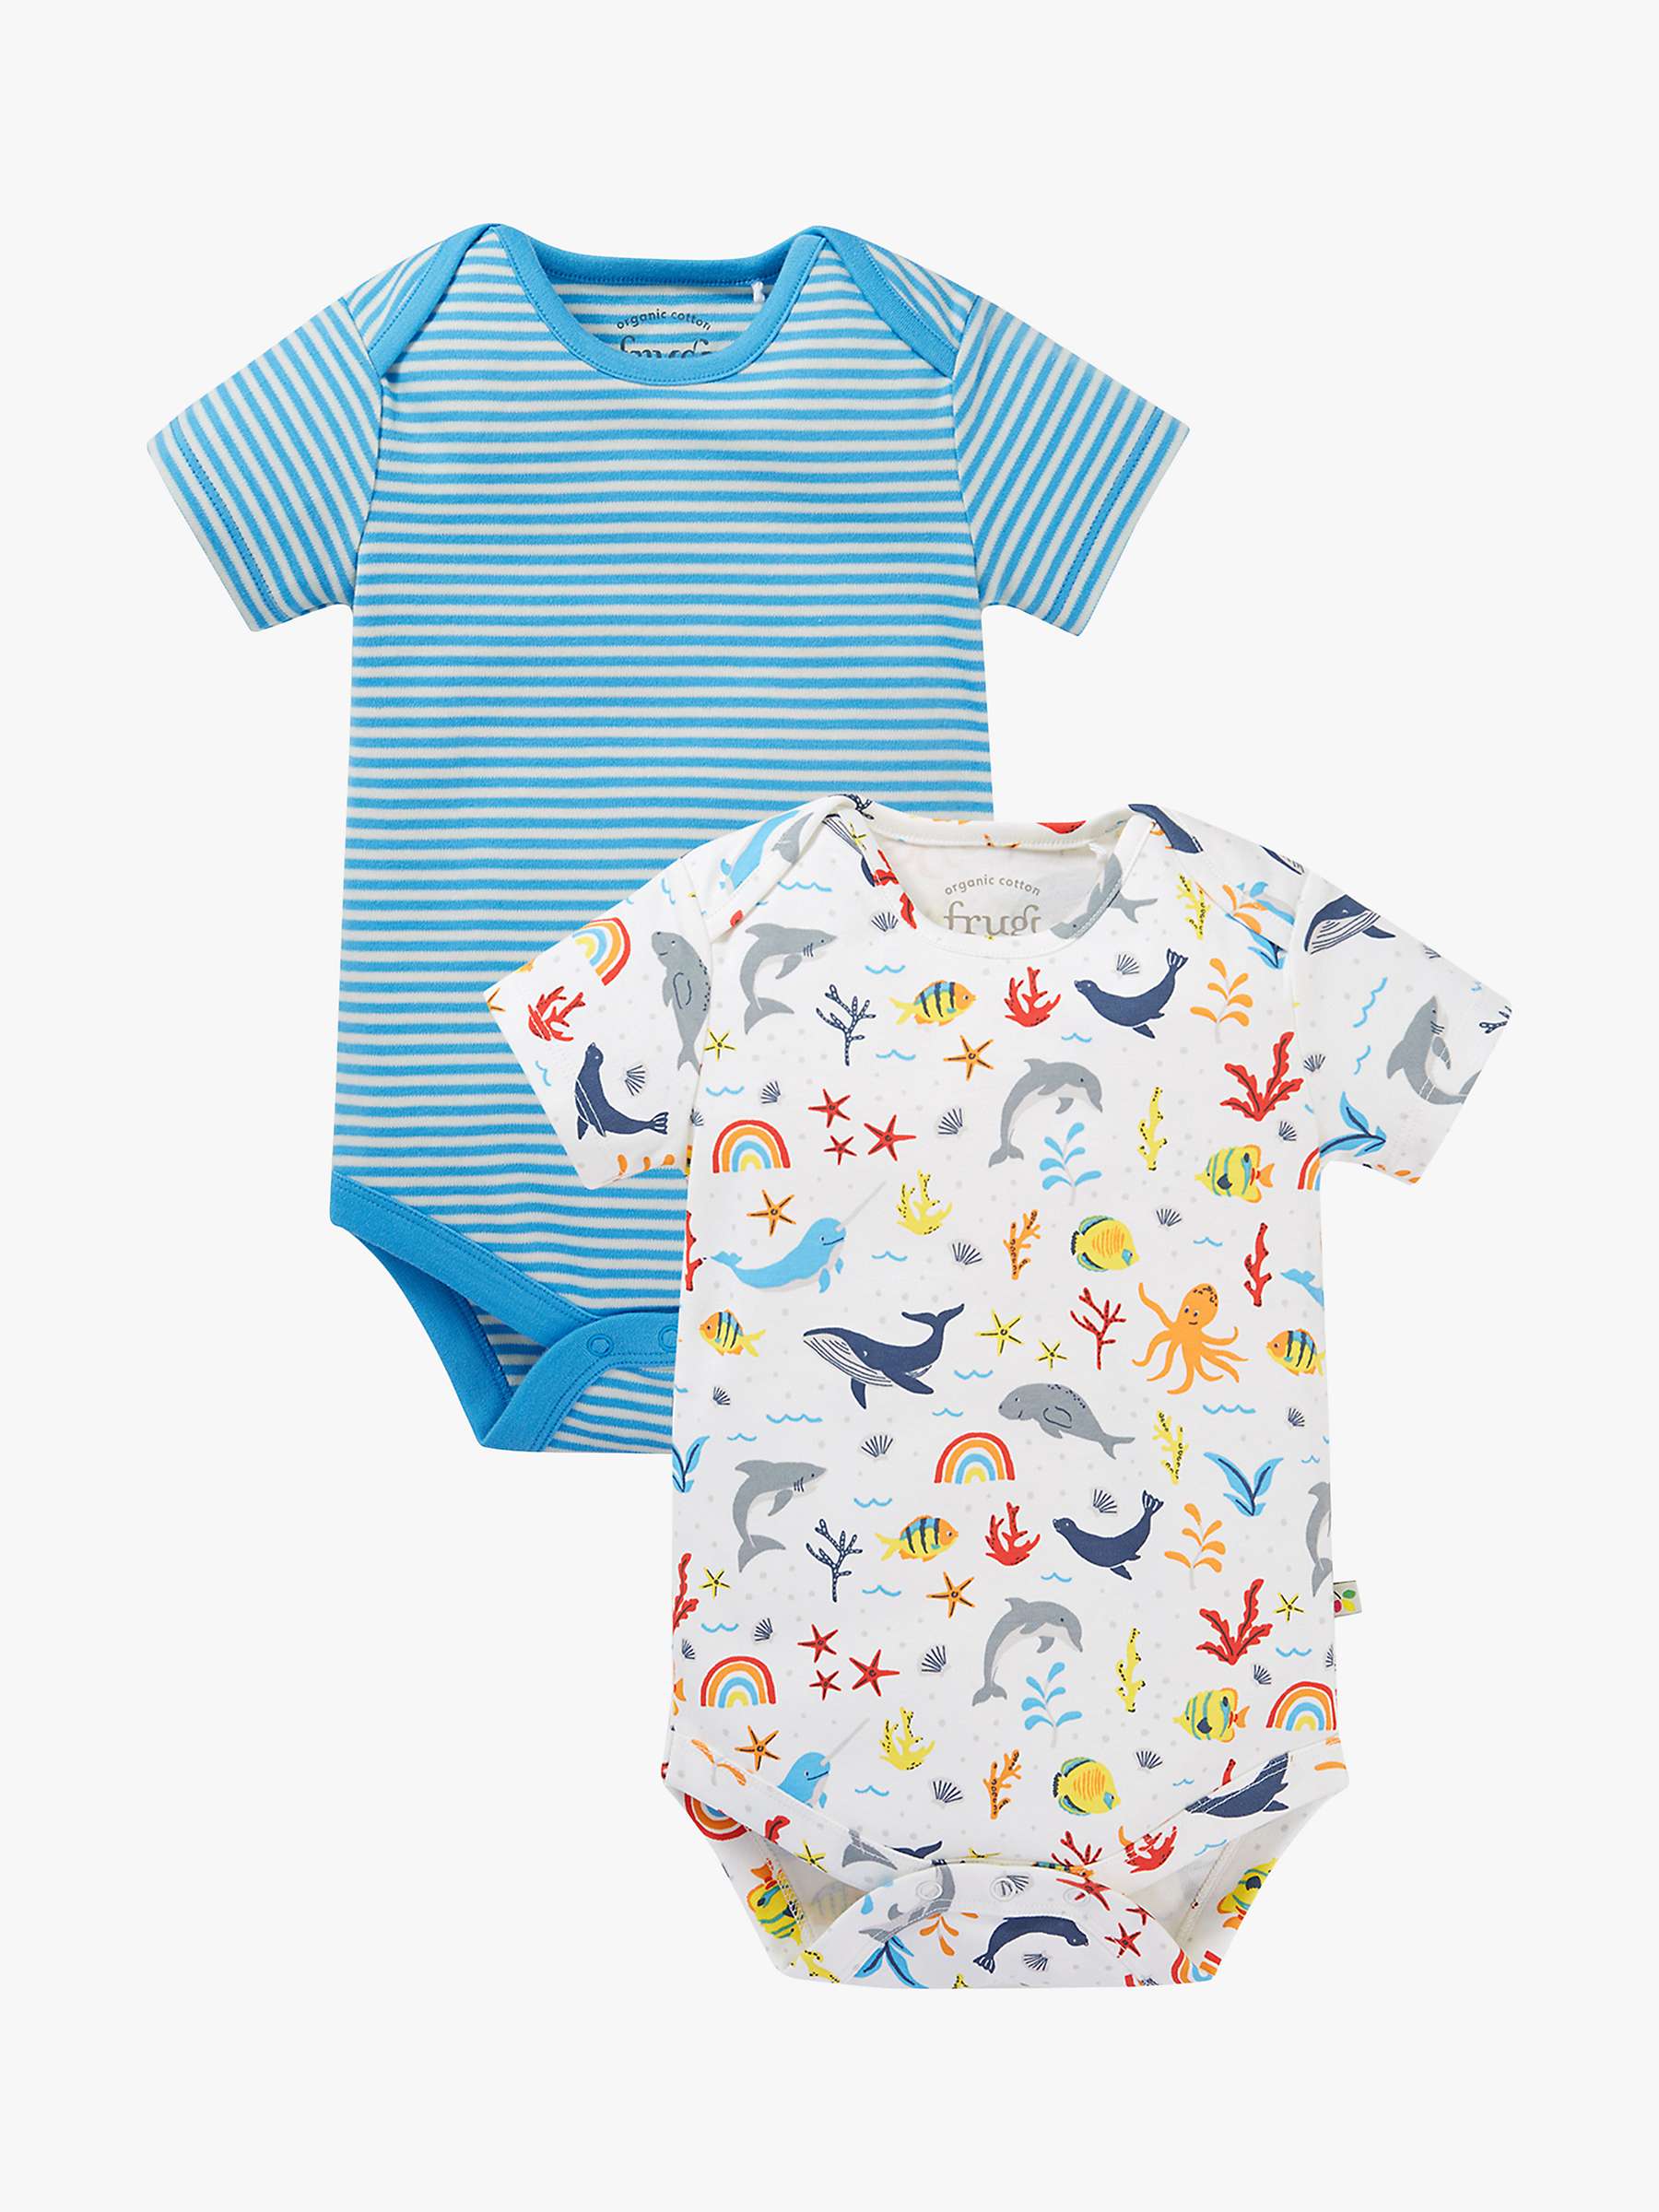 Buy Frugi Baby Organic Cotton Super Special Bodysuits, Pack Of 2, Multi Online at johnlewis.com